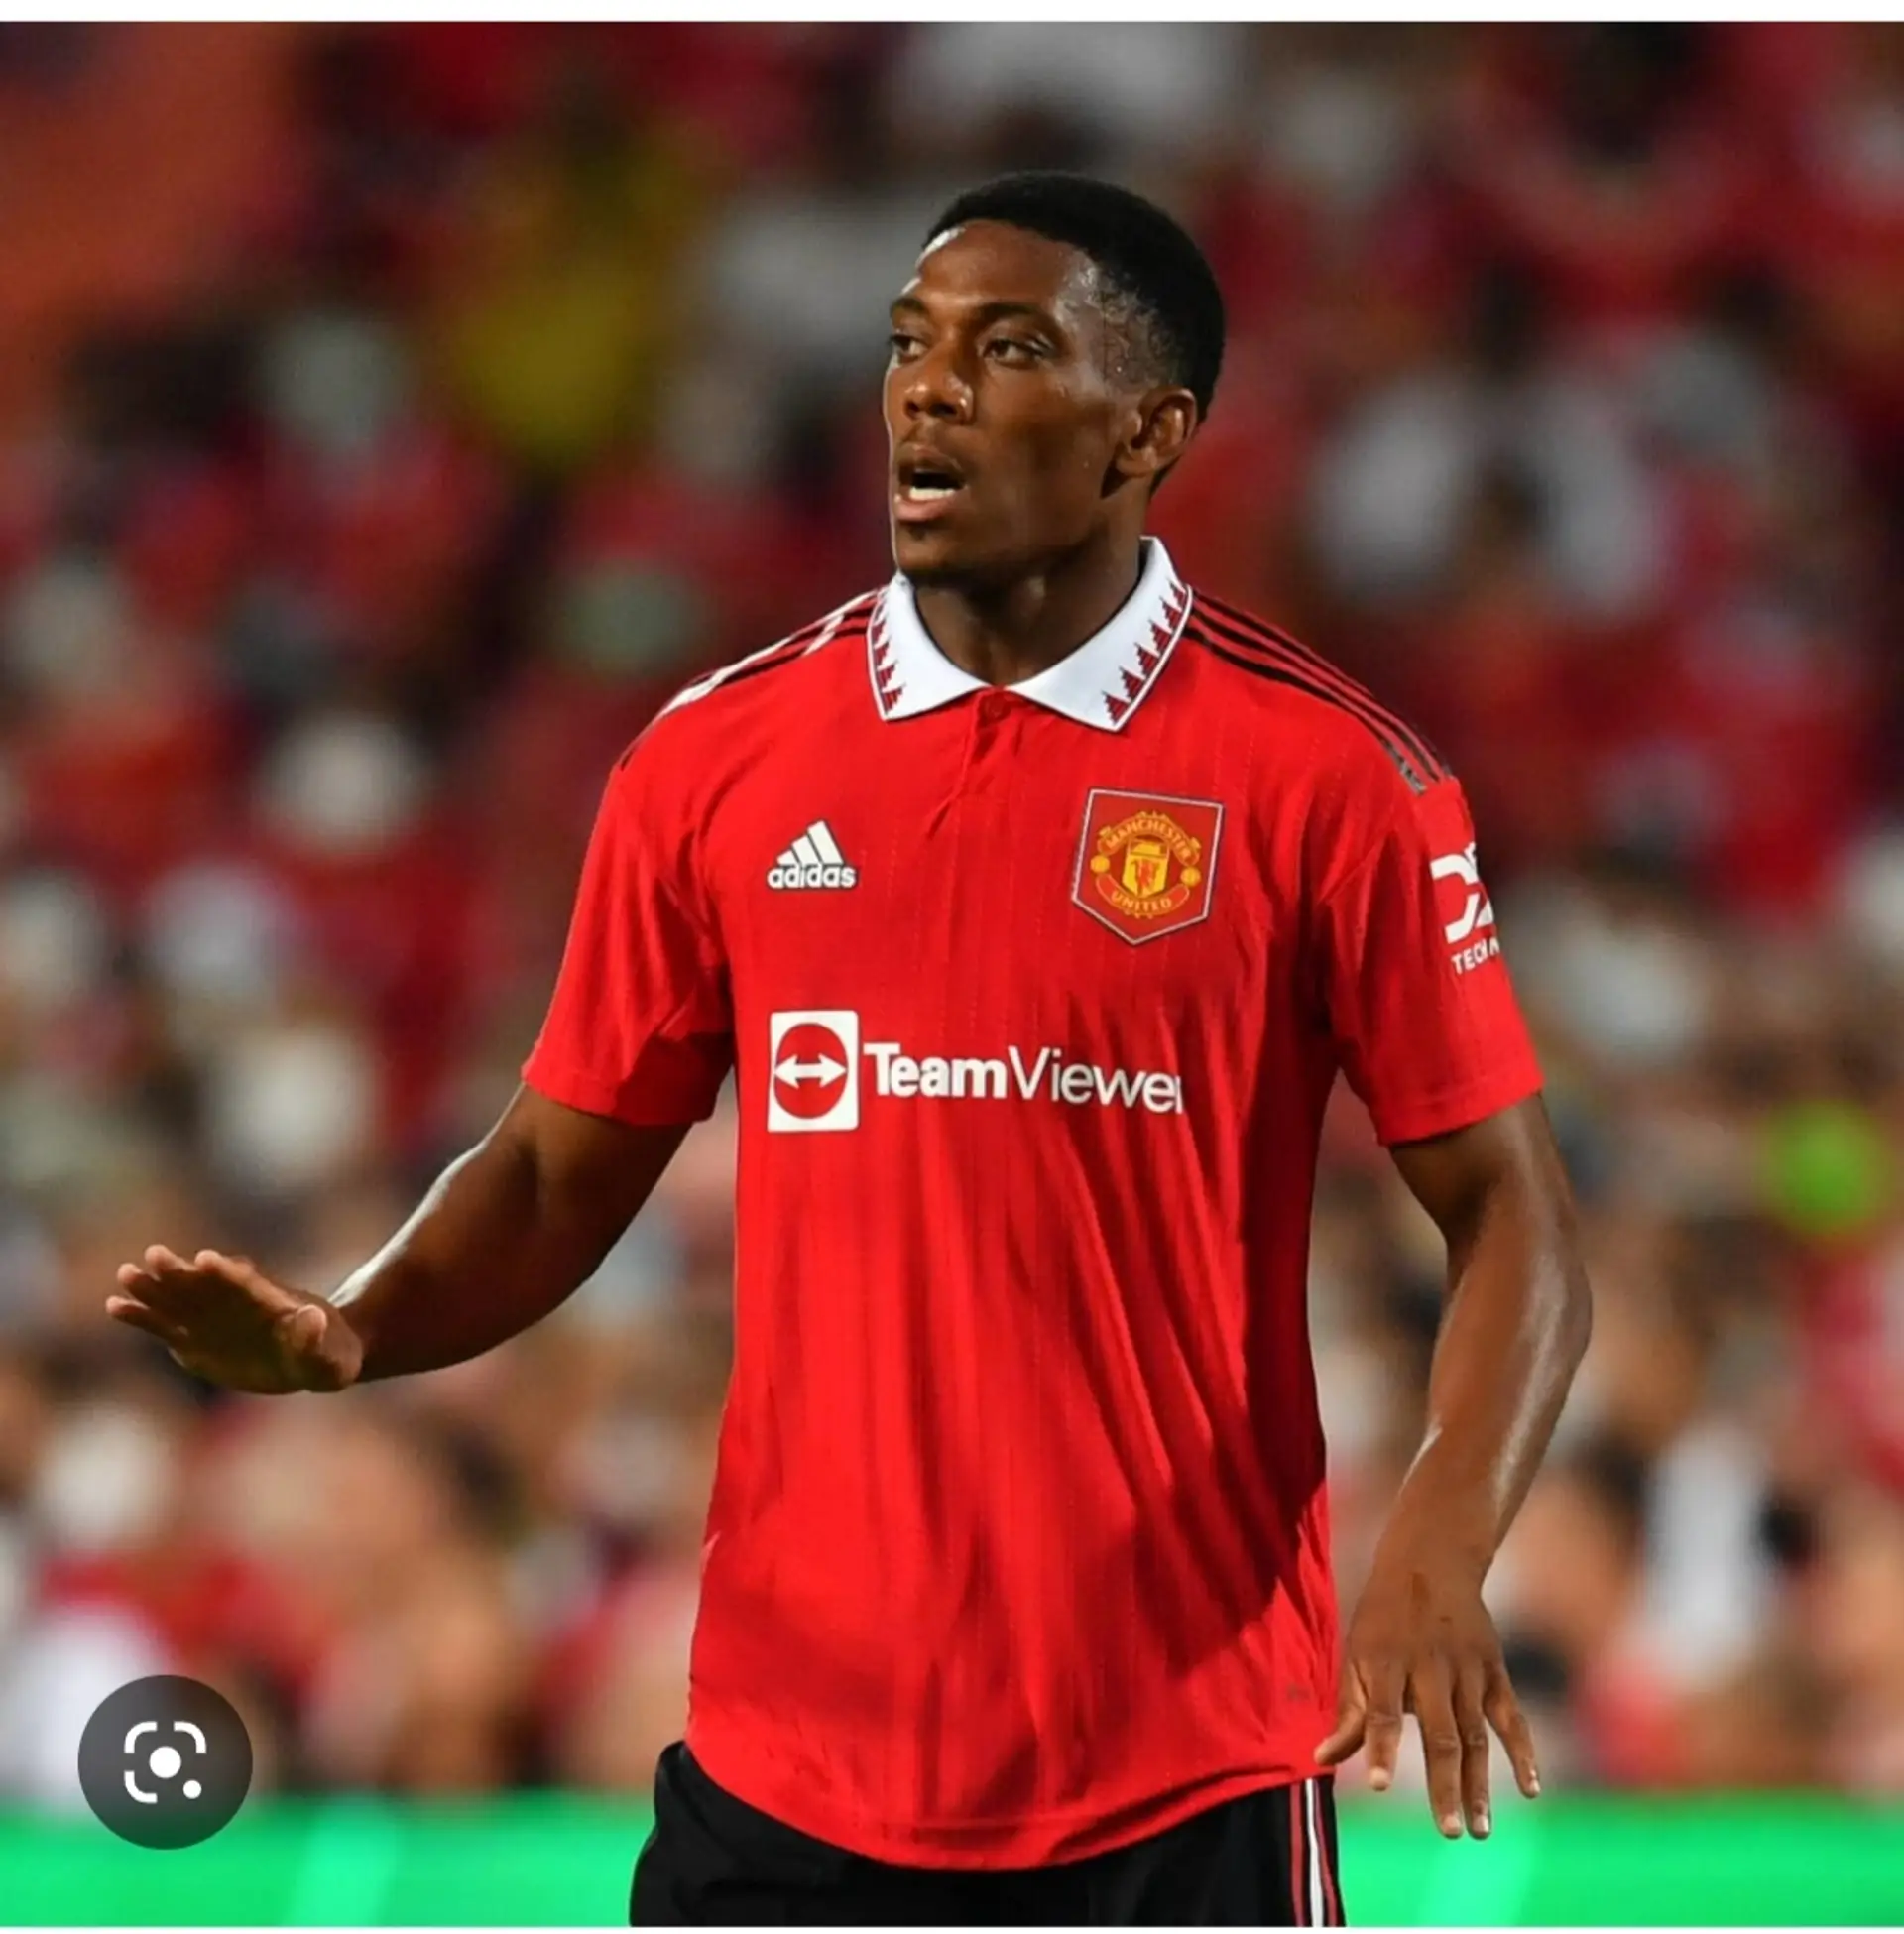 ANTHONY MARTIAL NOT A NO. 9